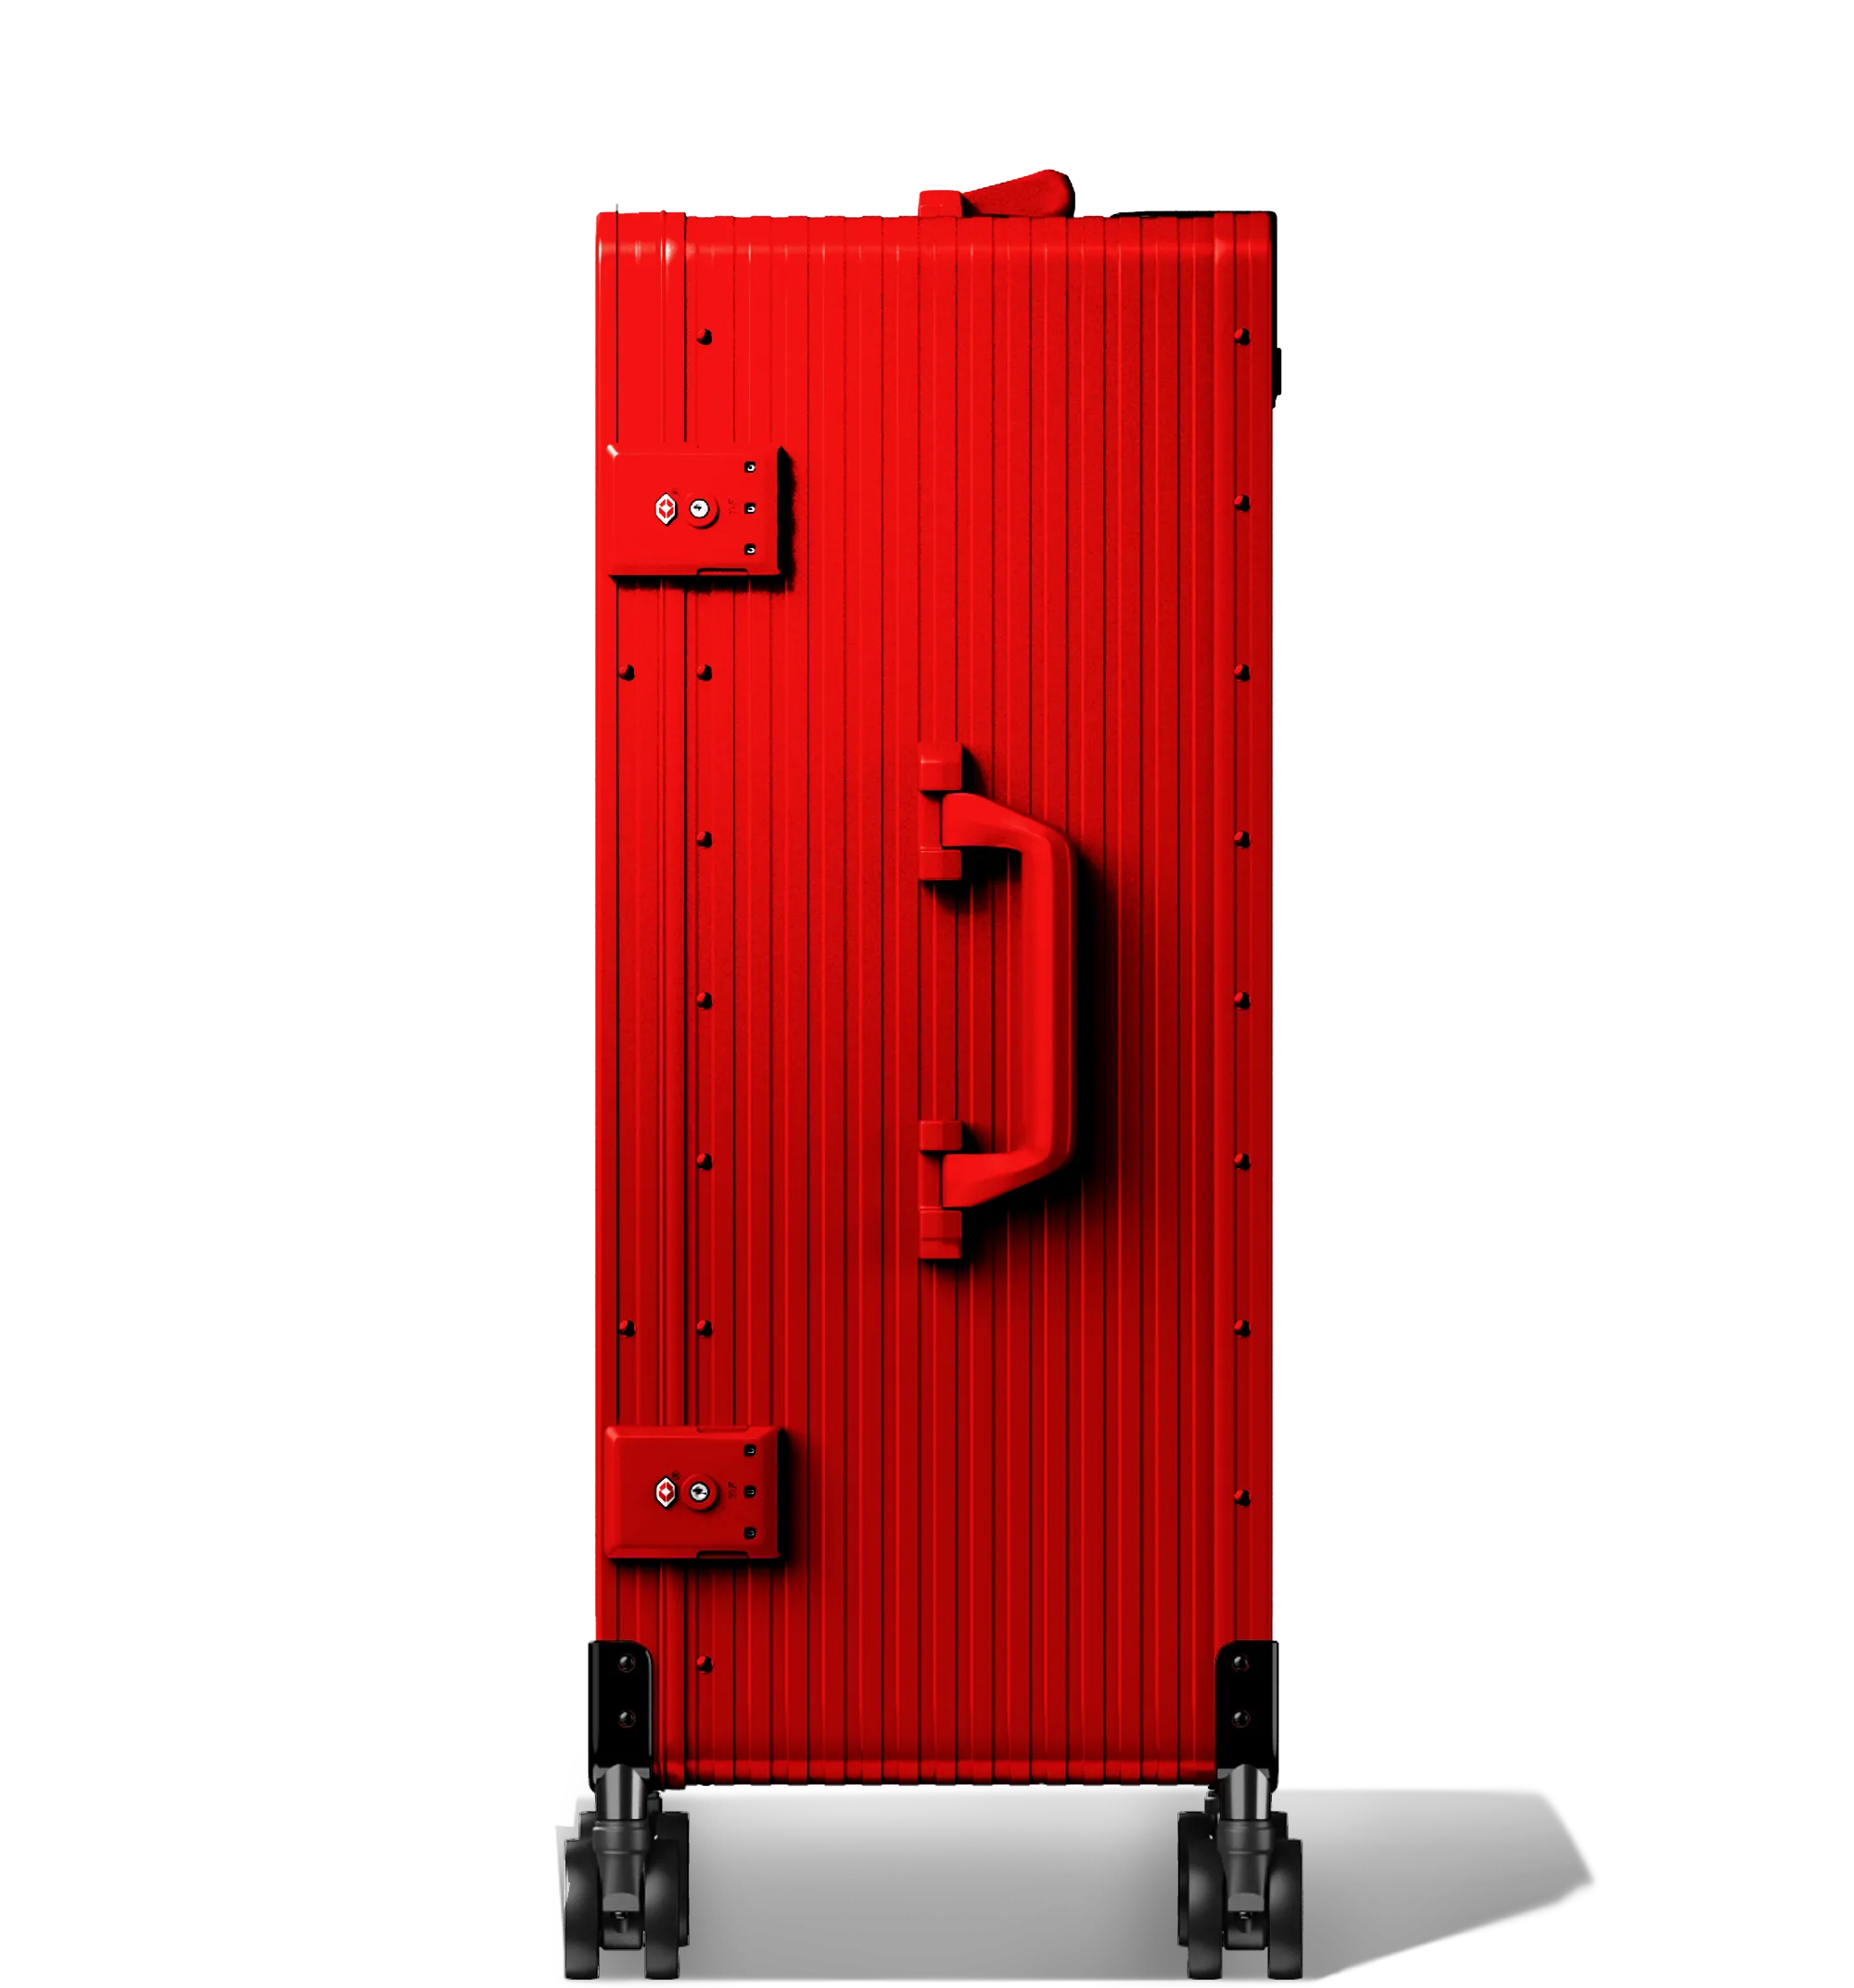 A Red Check-In 65/25 hard-shell aluminium Luggage standing upright with ribbed texture, side and top carry handles, two TSA-approved combination locks, and four spinning wheels, against a white background.